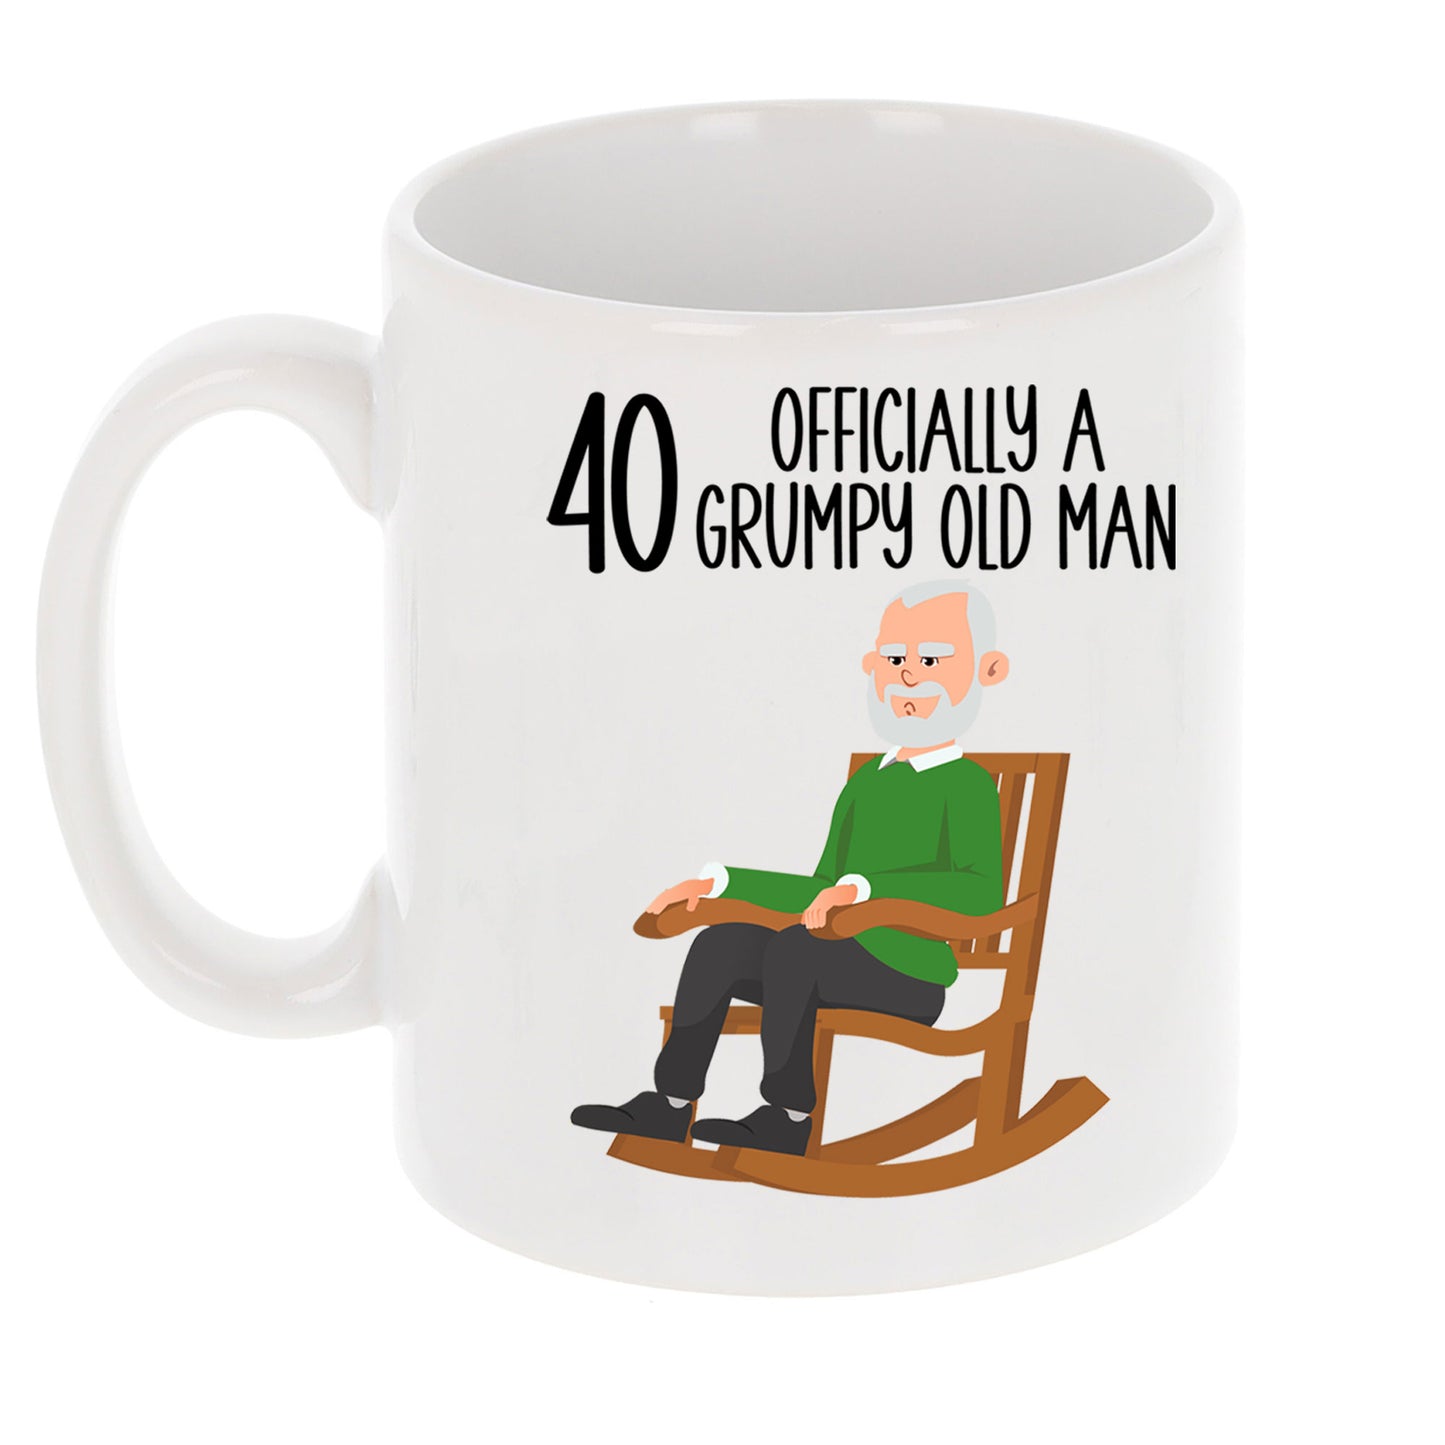 40 Officially A Grumpy Old Man Mug and/or Coaster Gift  - Always Looking Good - Mug On Its Own  